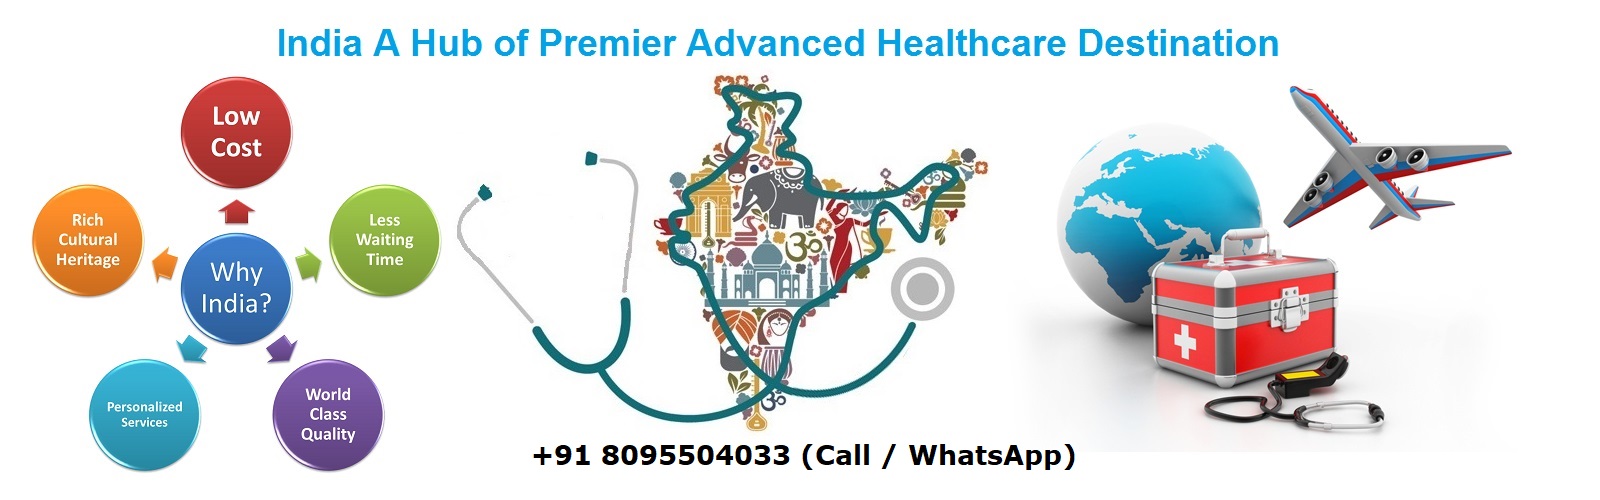 Best Medical Treatment in India – Find Cost Estimate, Second Opinion and Apply Indian Medical Visa